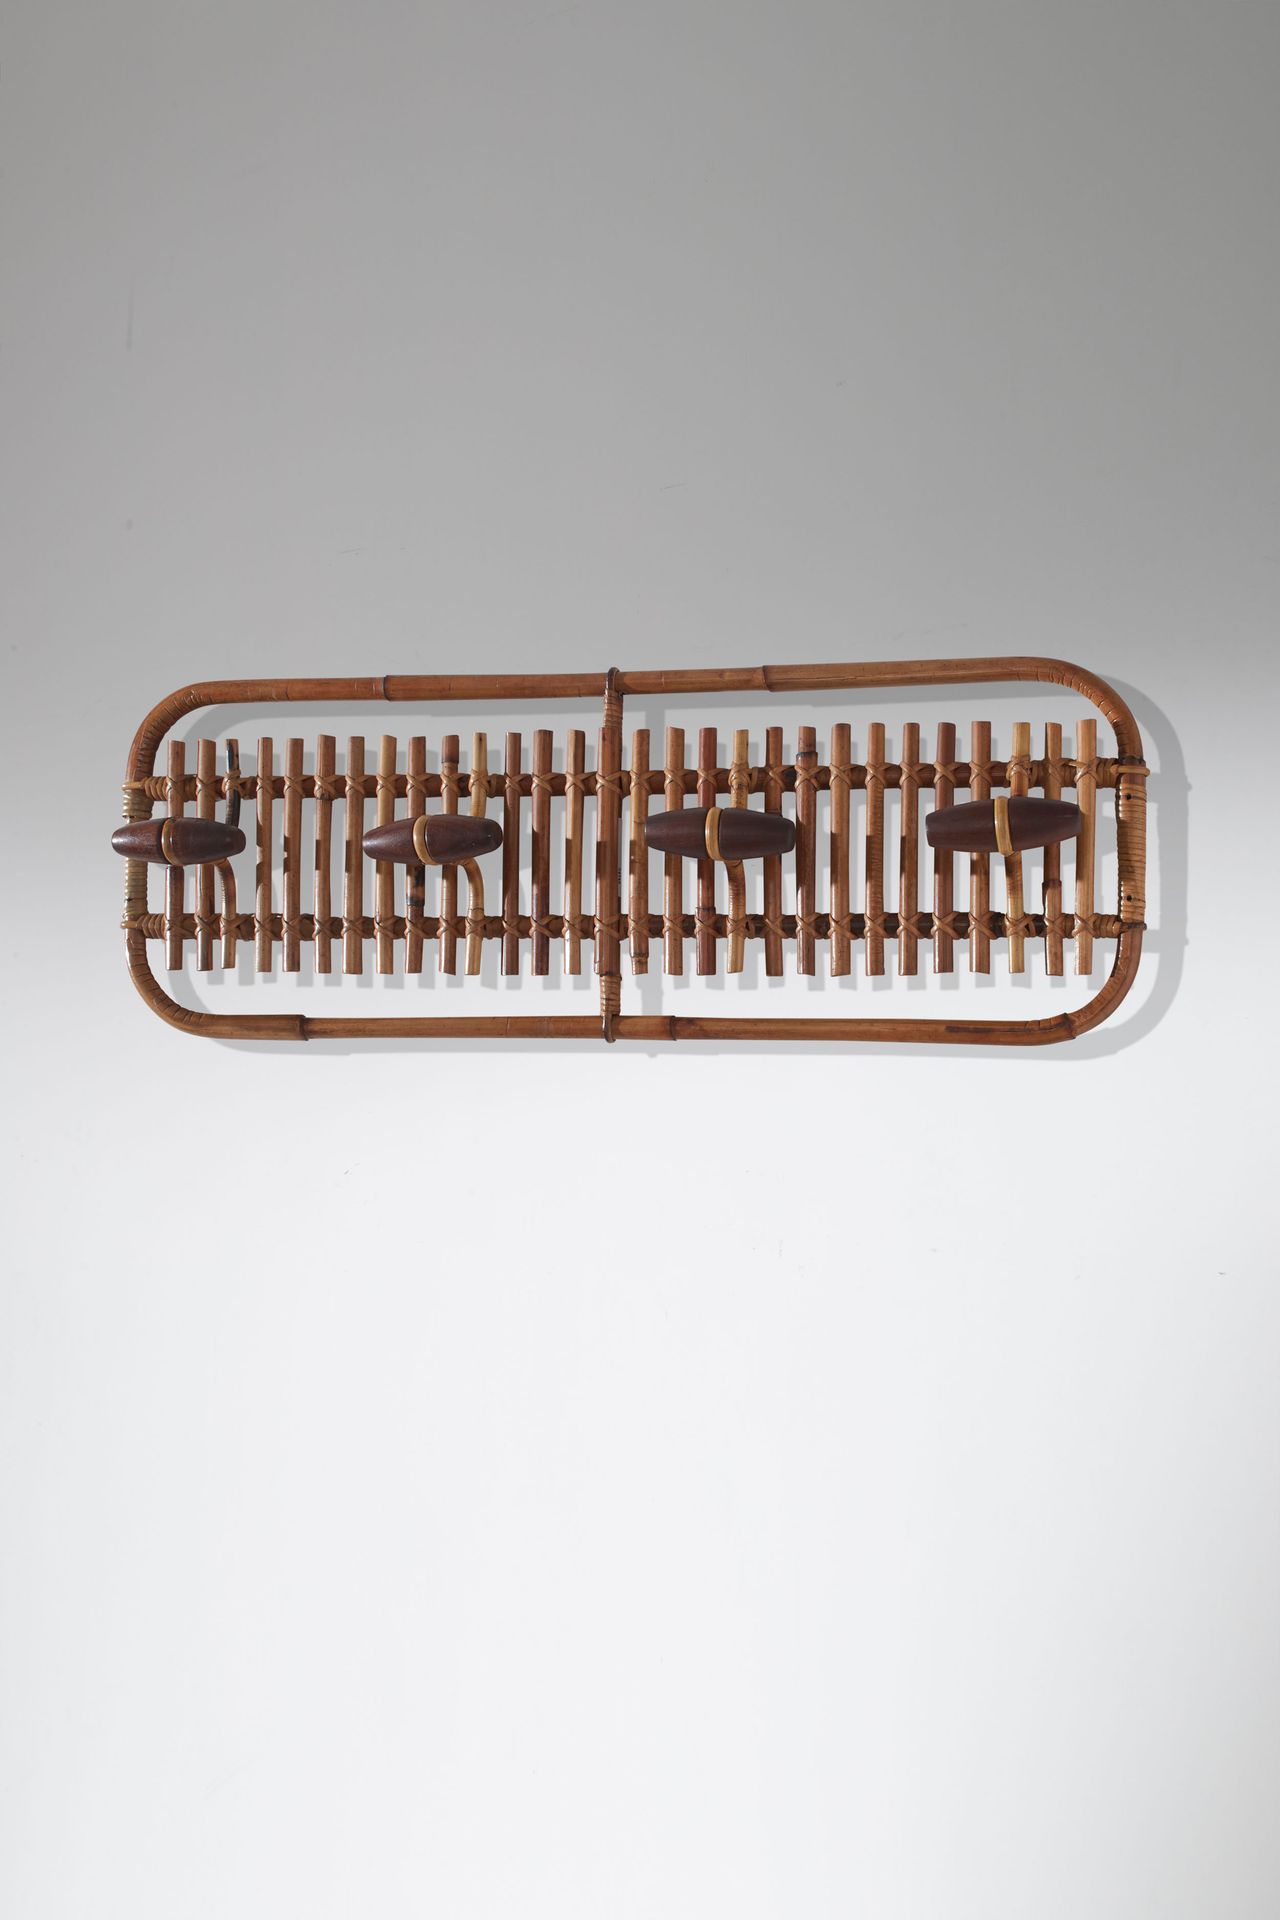 OLAF VON BOHR Coat rack. Bamboo, turned wood, woven wicker. Italy ca. 1960s.
Cm &hellip;